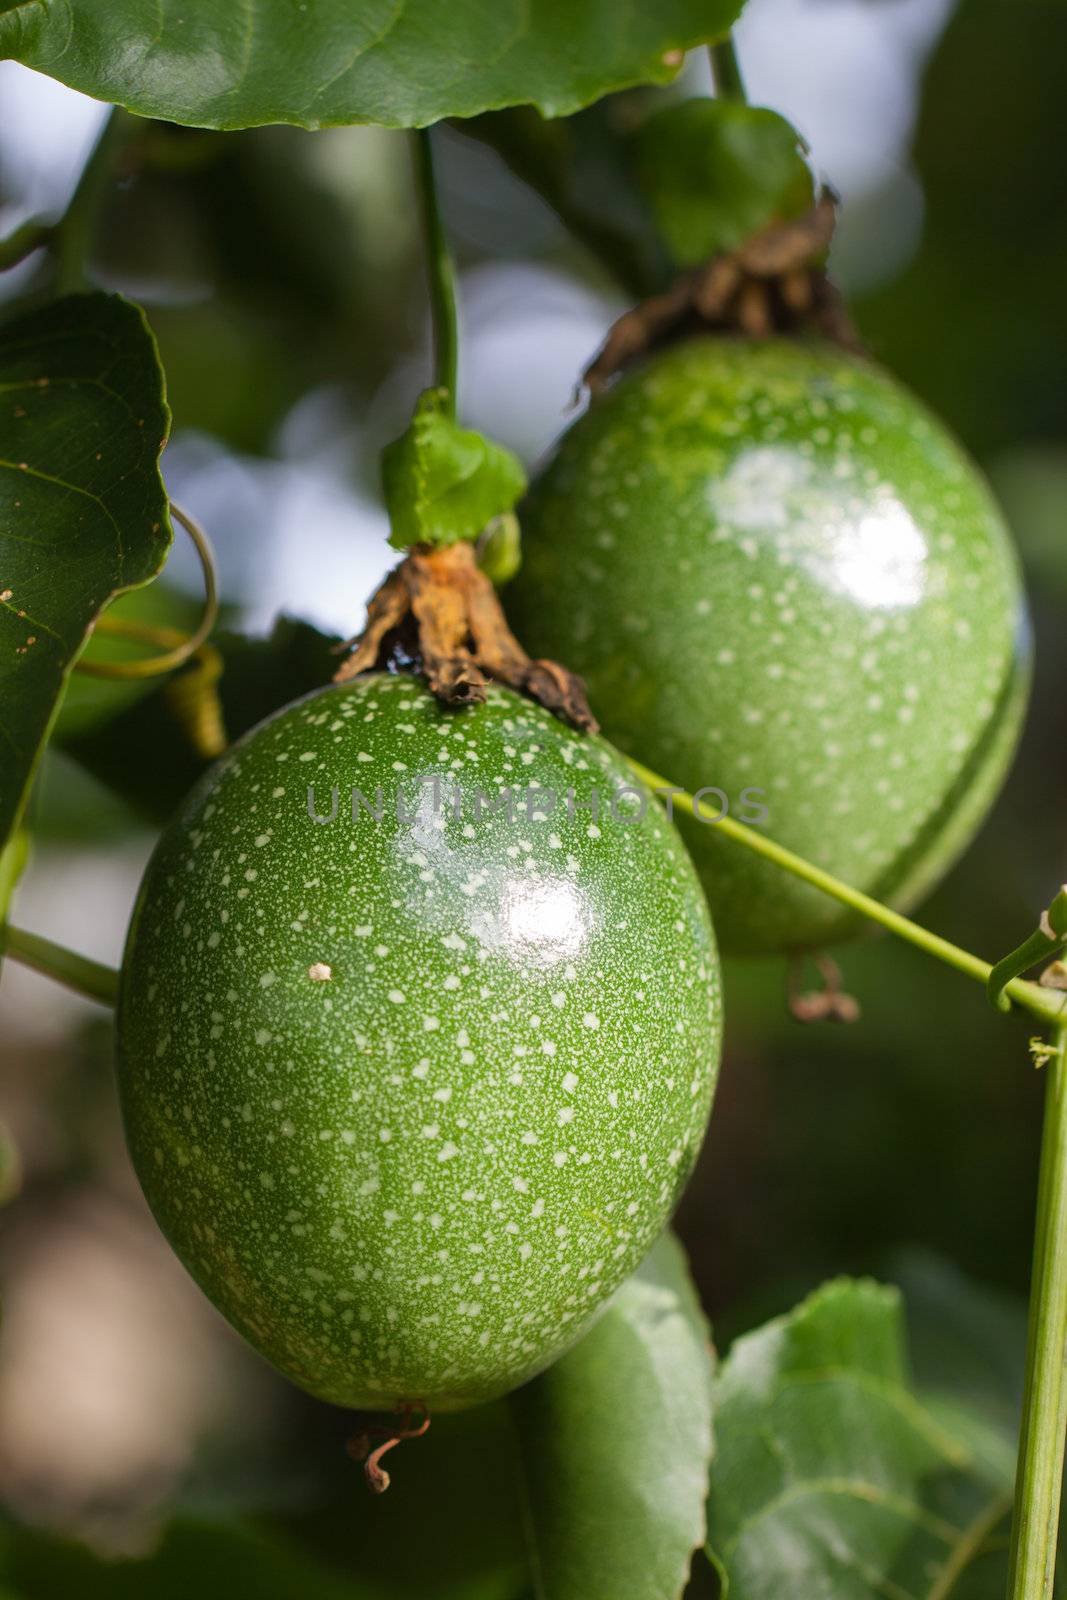 Two beautiful passion fruits growing on a vine.